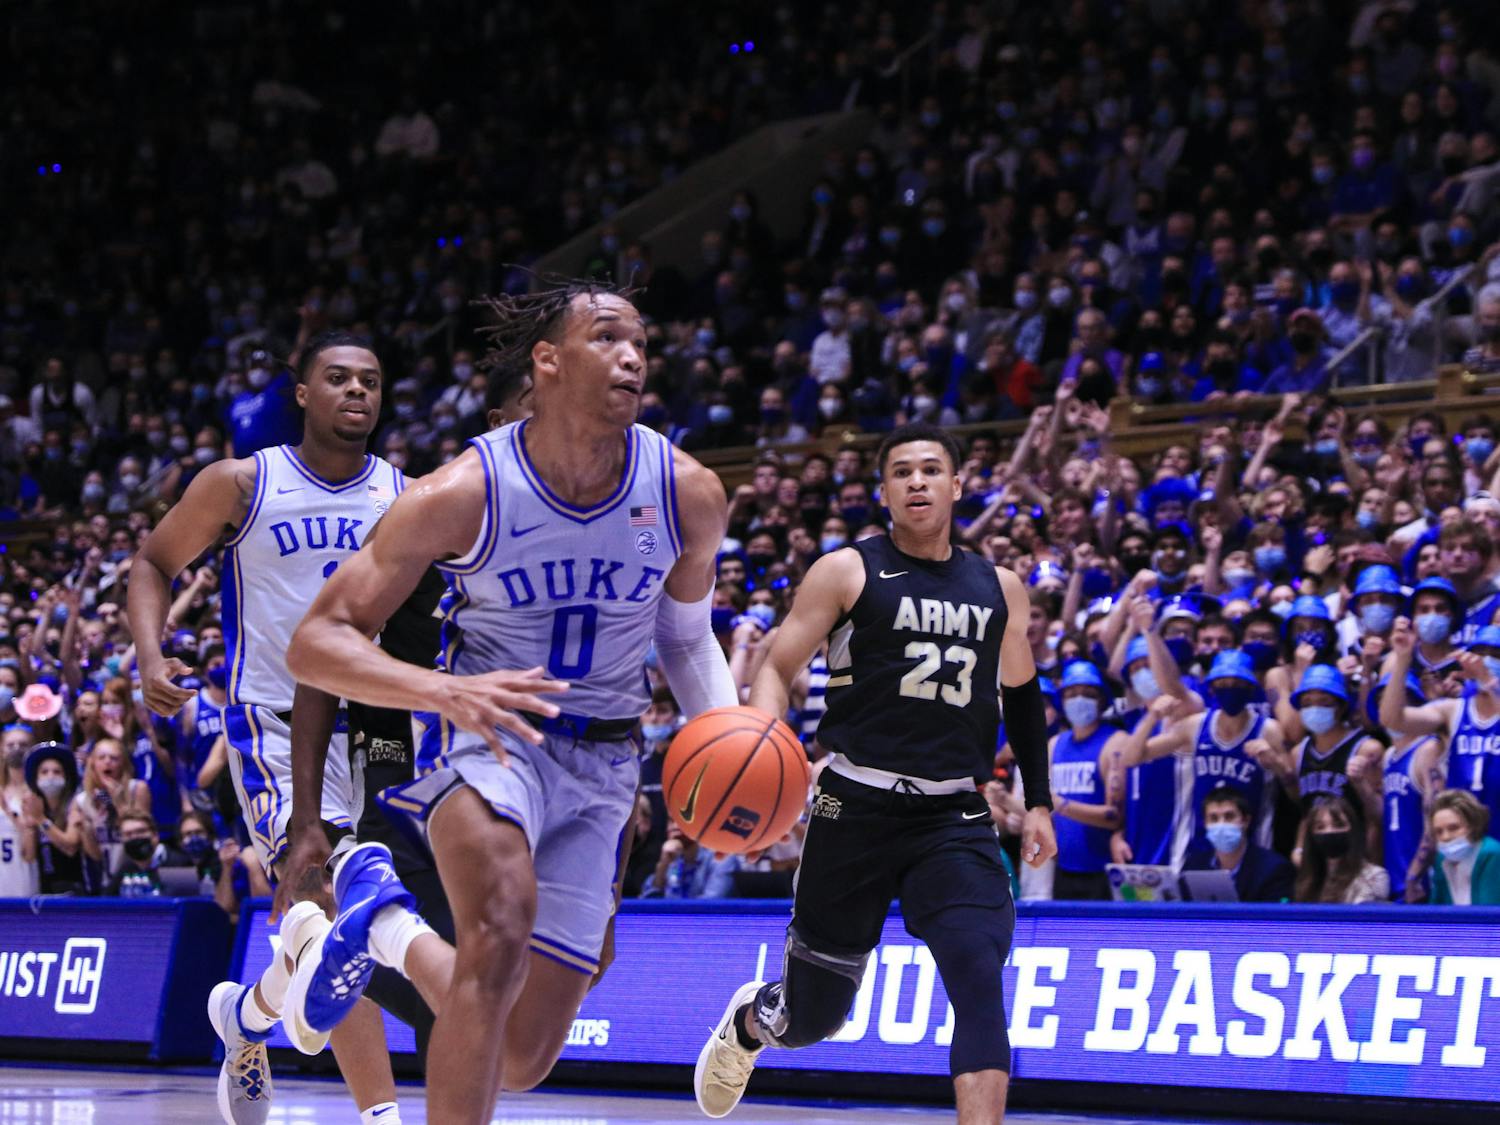 Wendell Moore Jr. posted the fifth triple-double in school history Friday night.